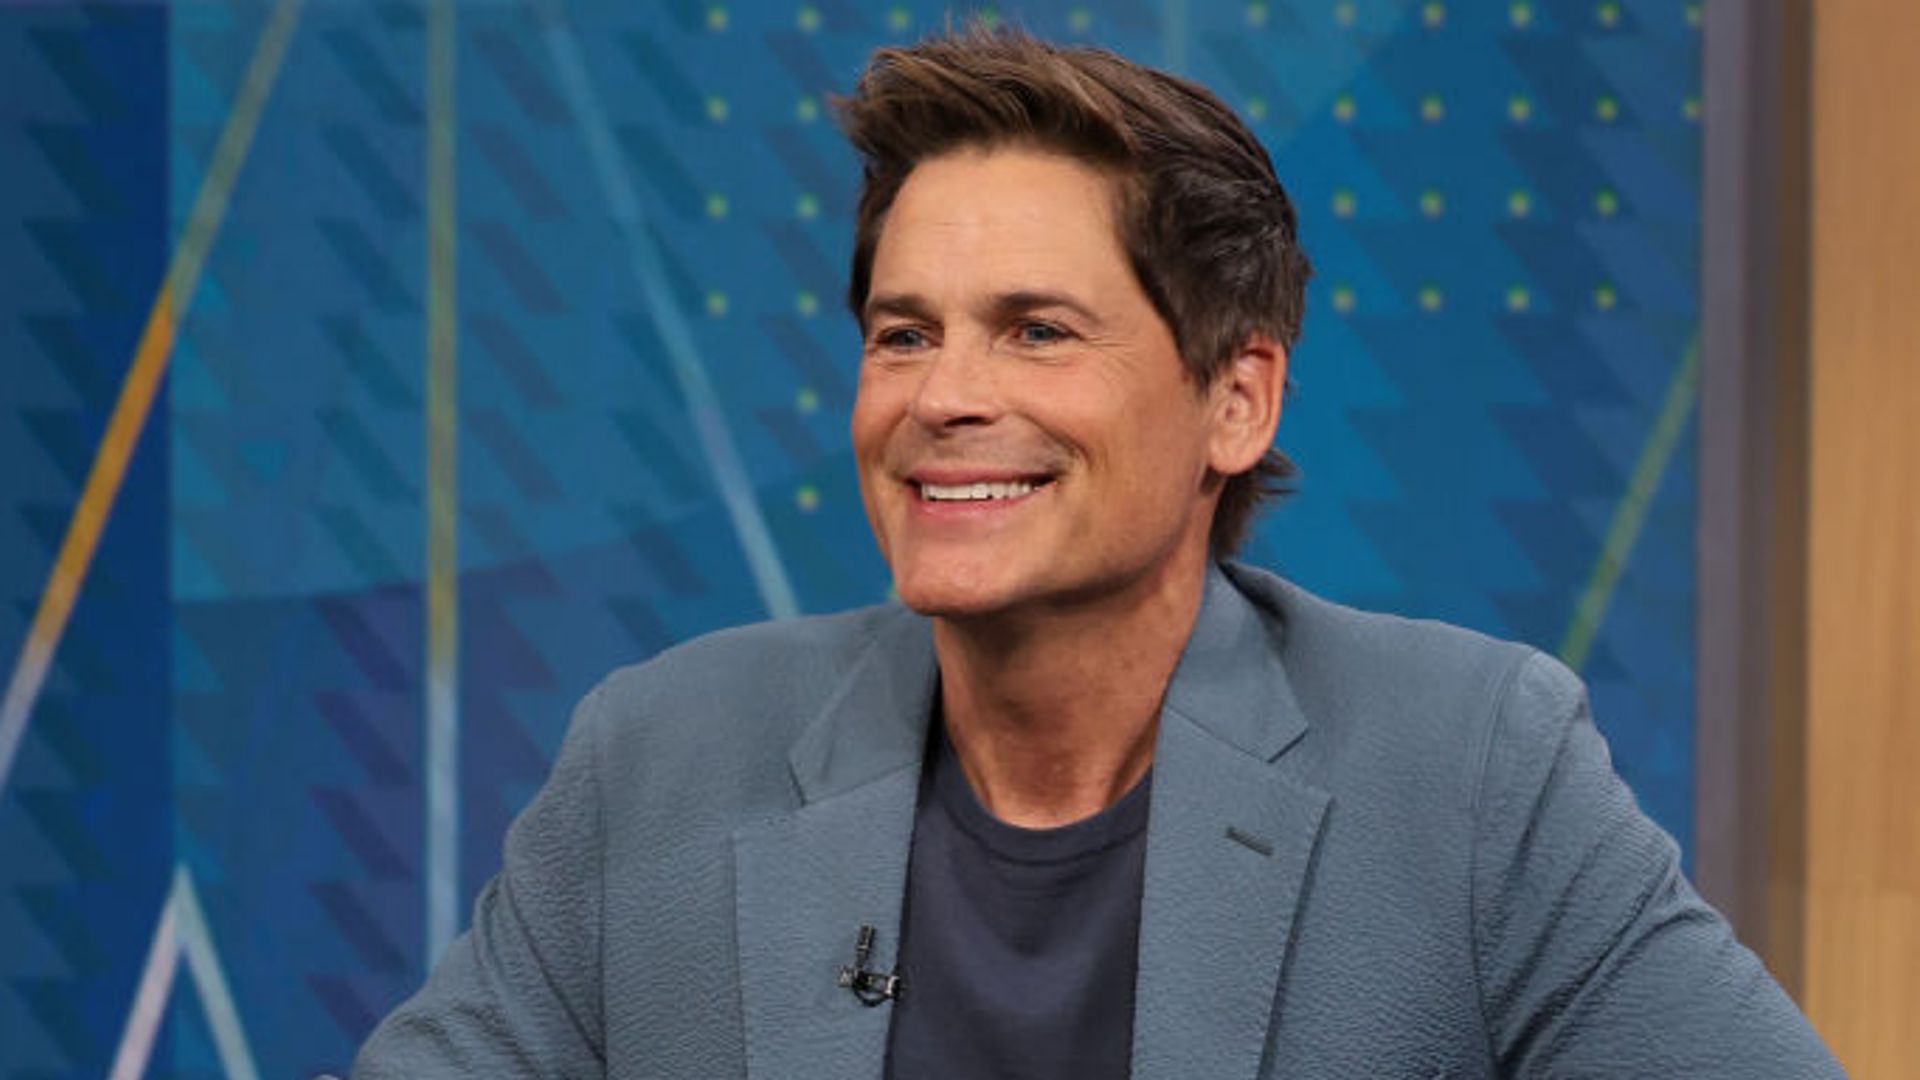 Rob Lowe wearing a navy T-shirt and ink blue blazer on Good Morning America